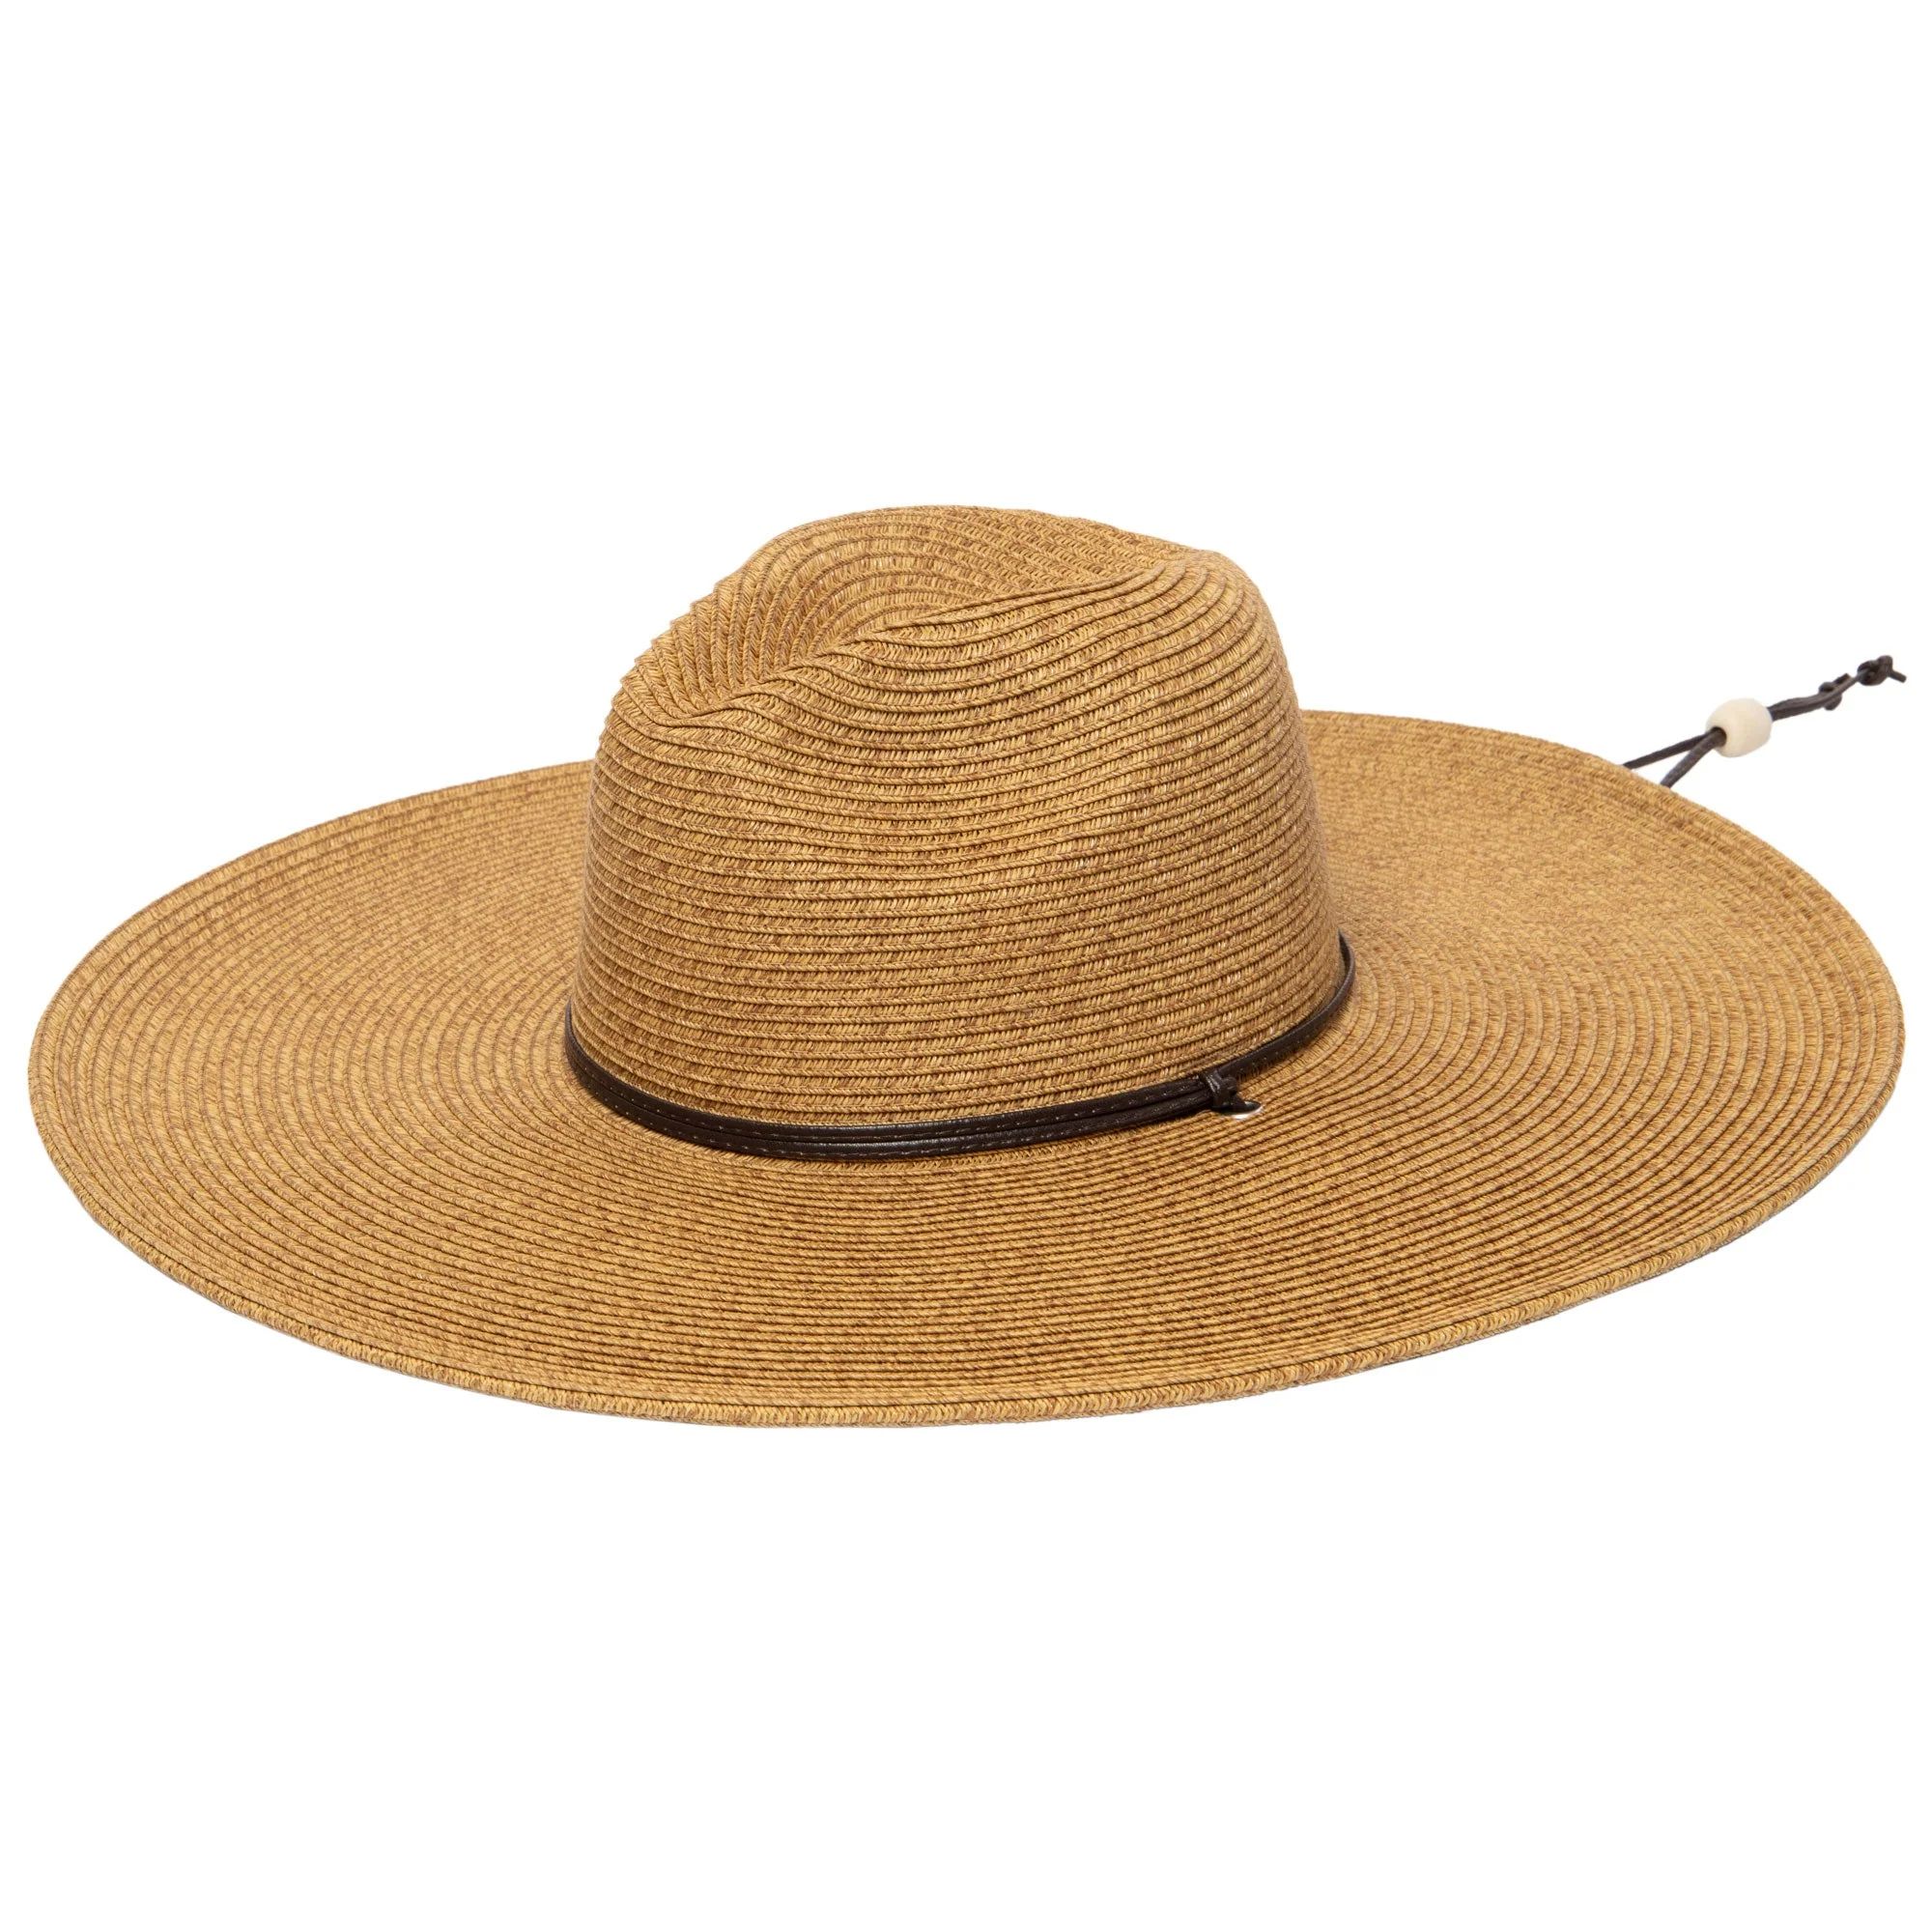 El Campo 5" Brim Sun Hat - UPF50 Sun Protection with Chin Cord by San Diego Hat Co. | San Diego Hat Company